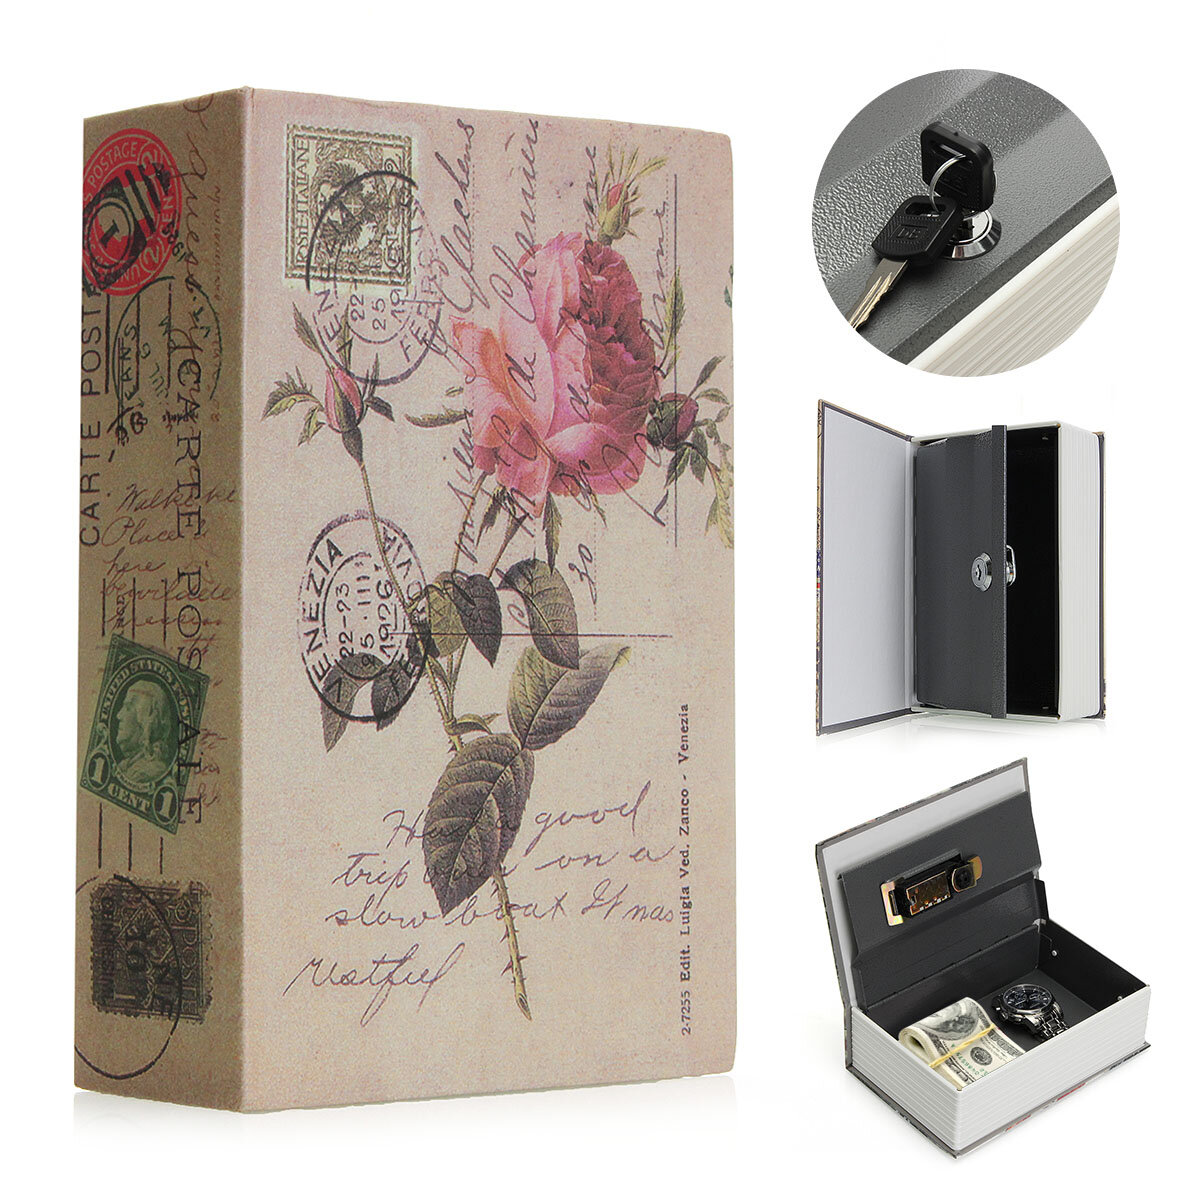 Mini Home Hidden Dictionary Book Safe Cash Jewelry Storage Key Lock Security Box Special Gifts